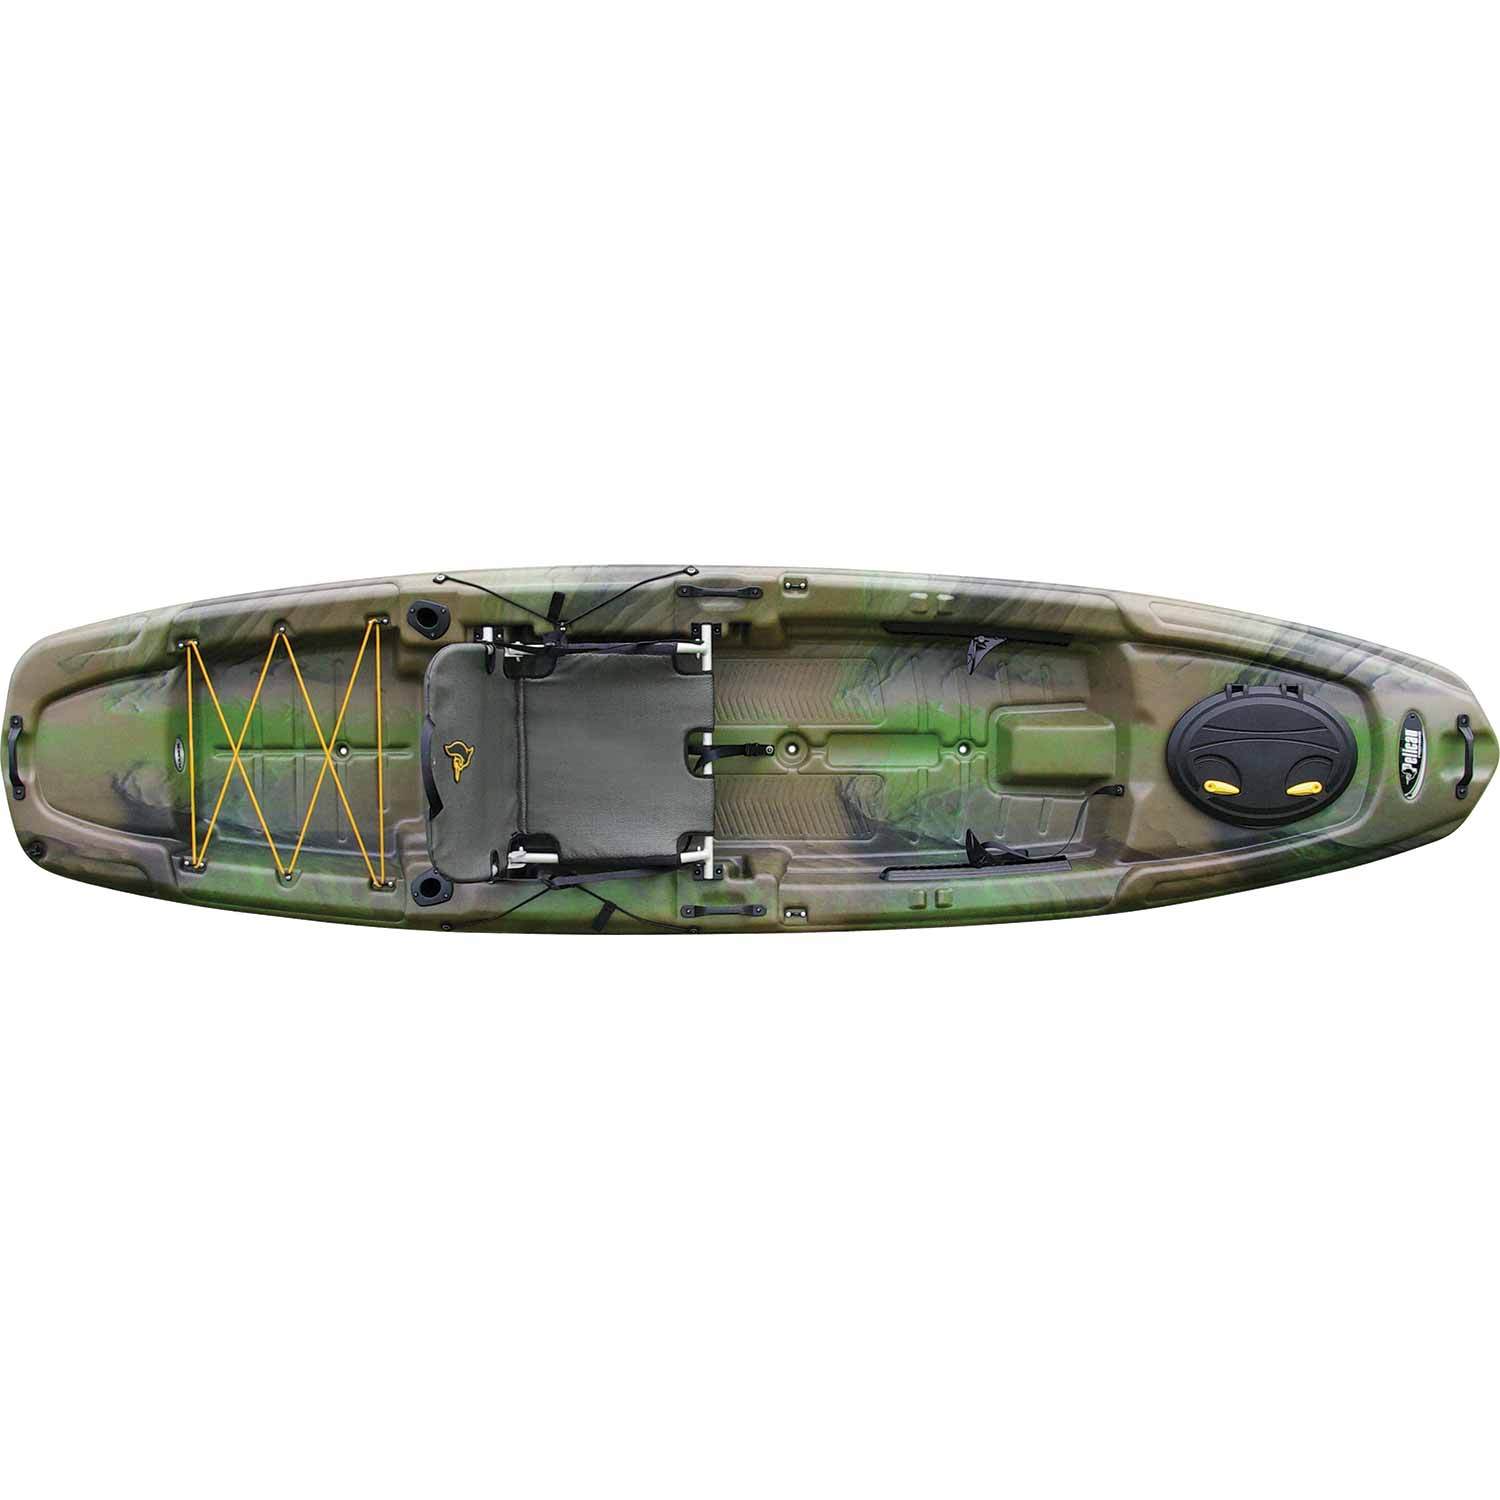 PELICAN The Catch 120 Sit-On-Top Angler Kayak